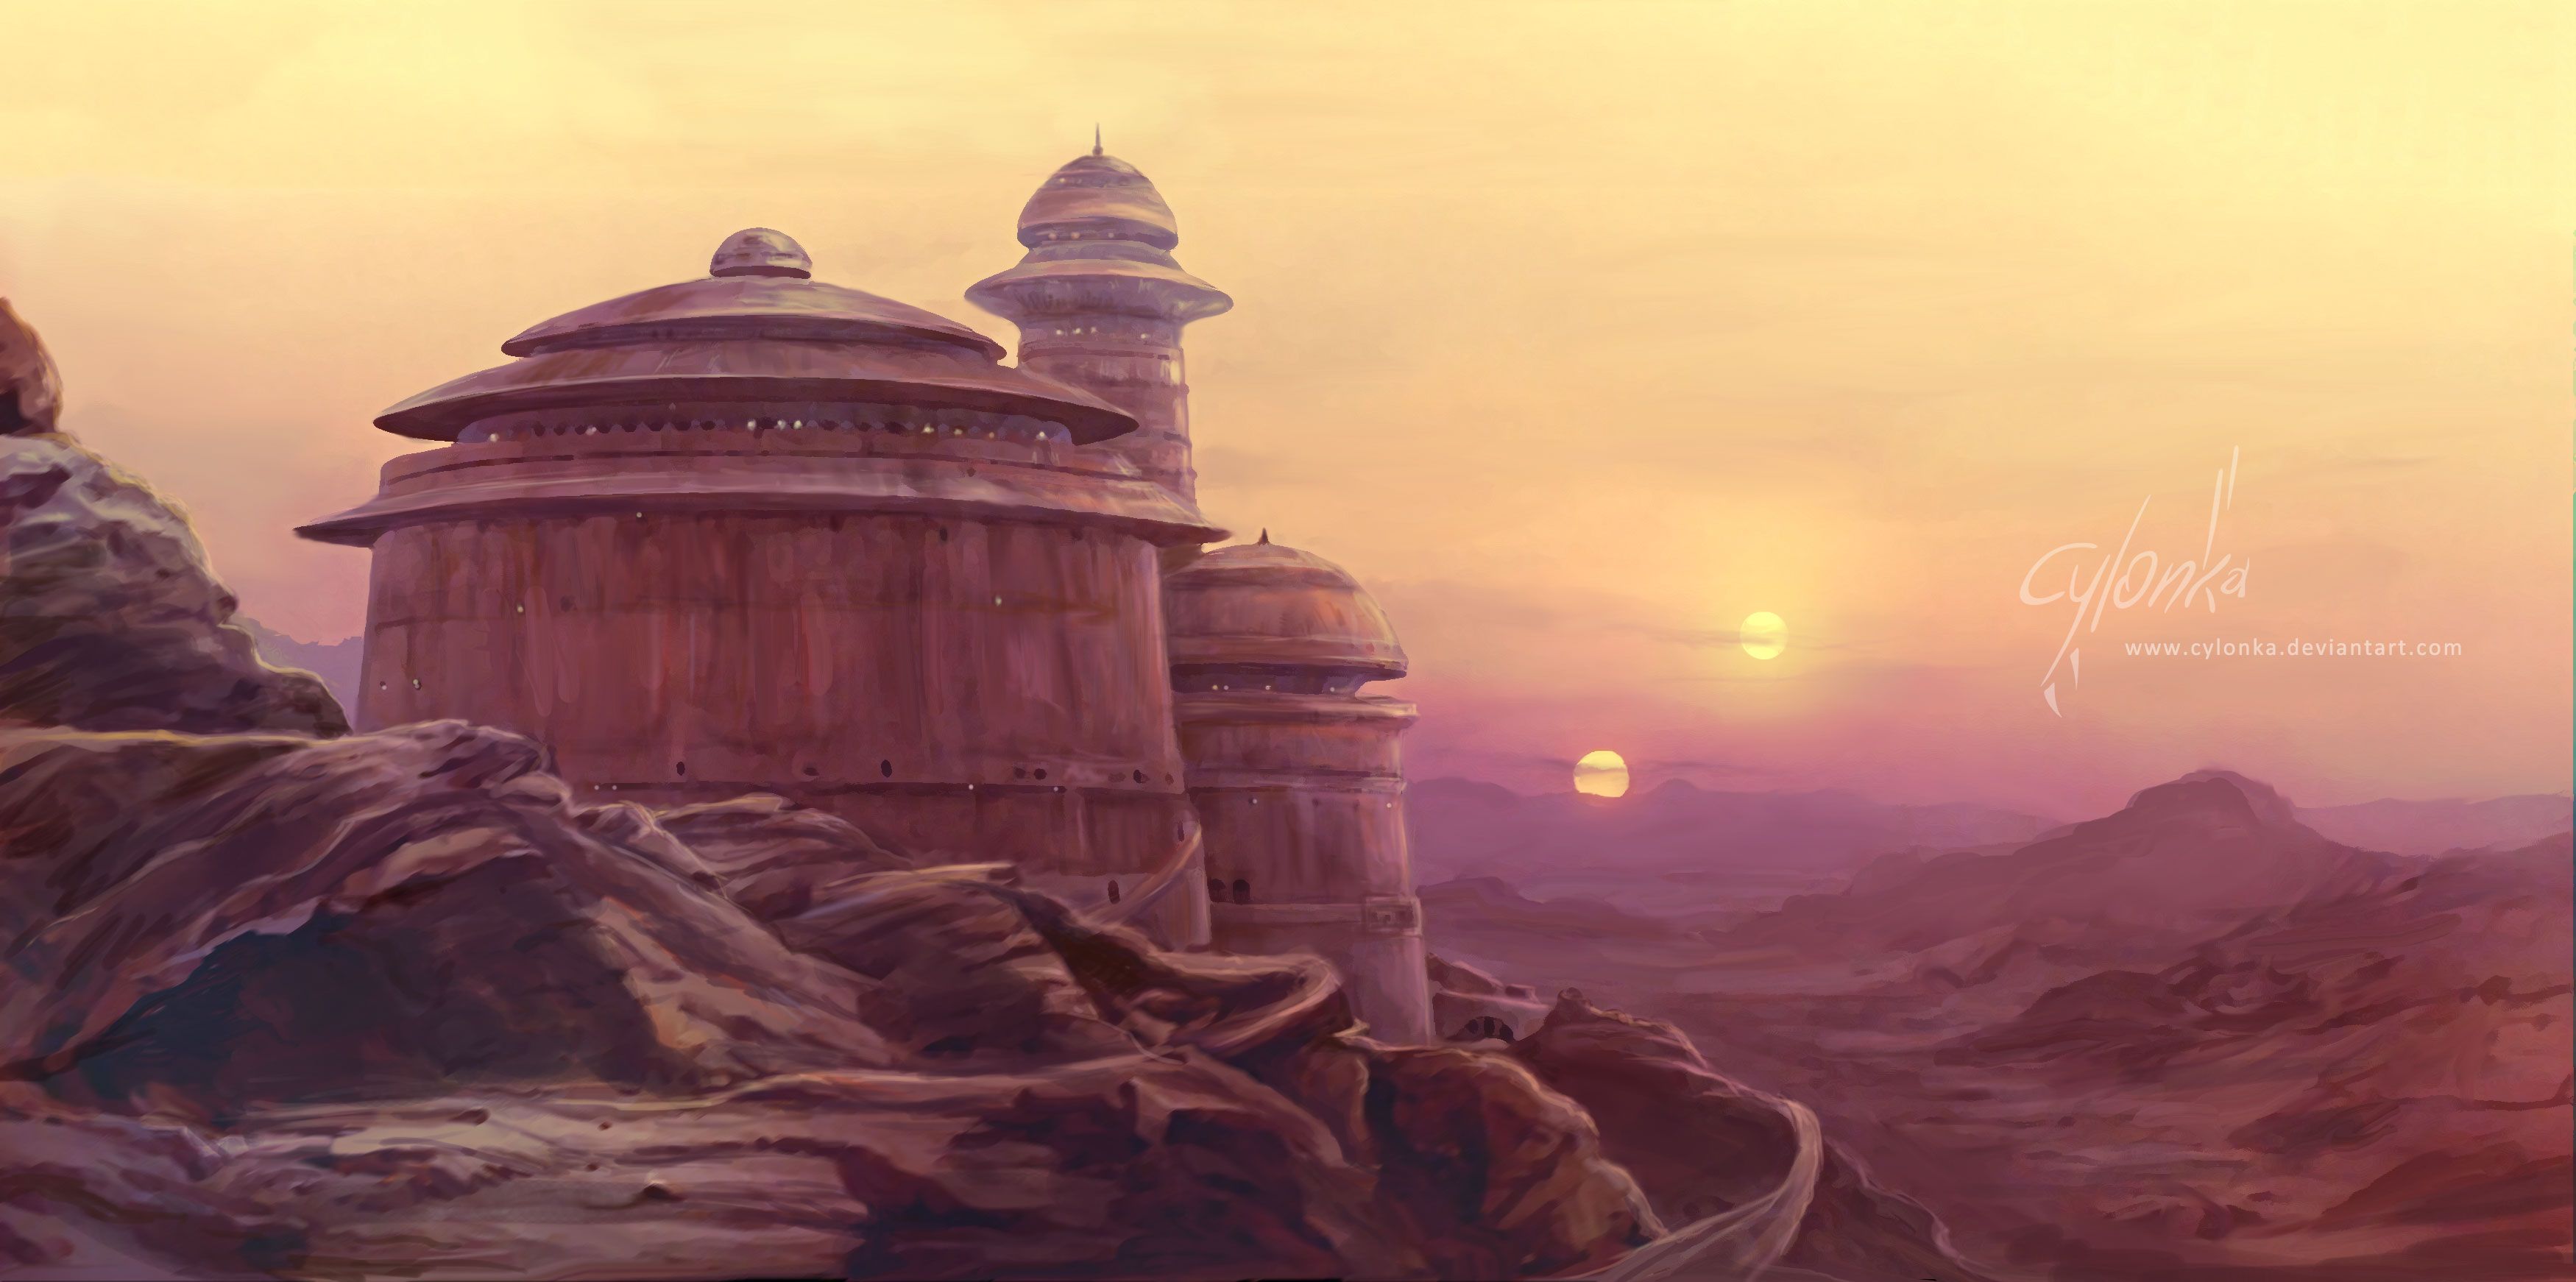 star wars scenery pictures